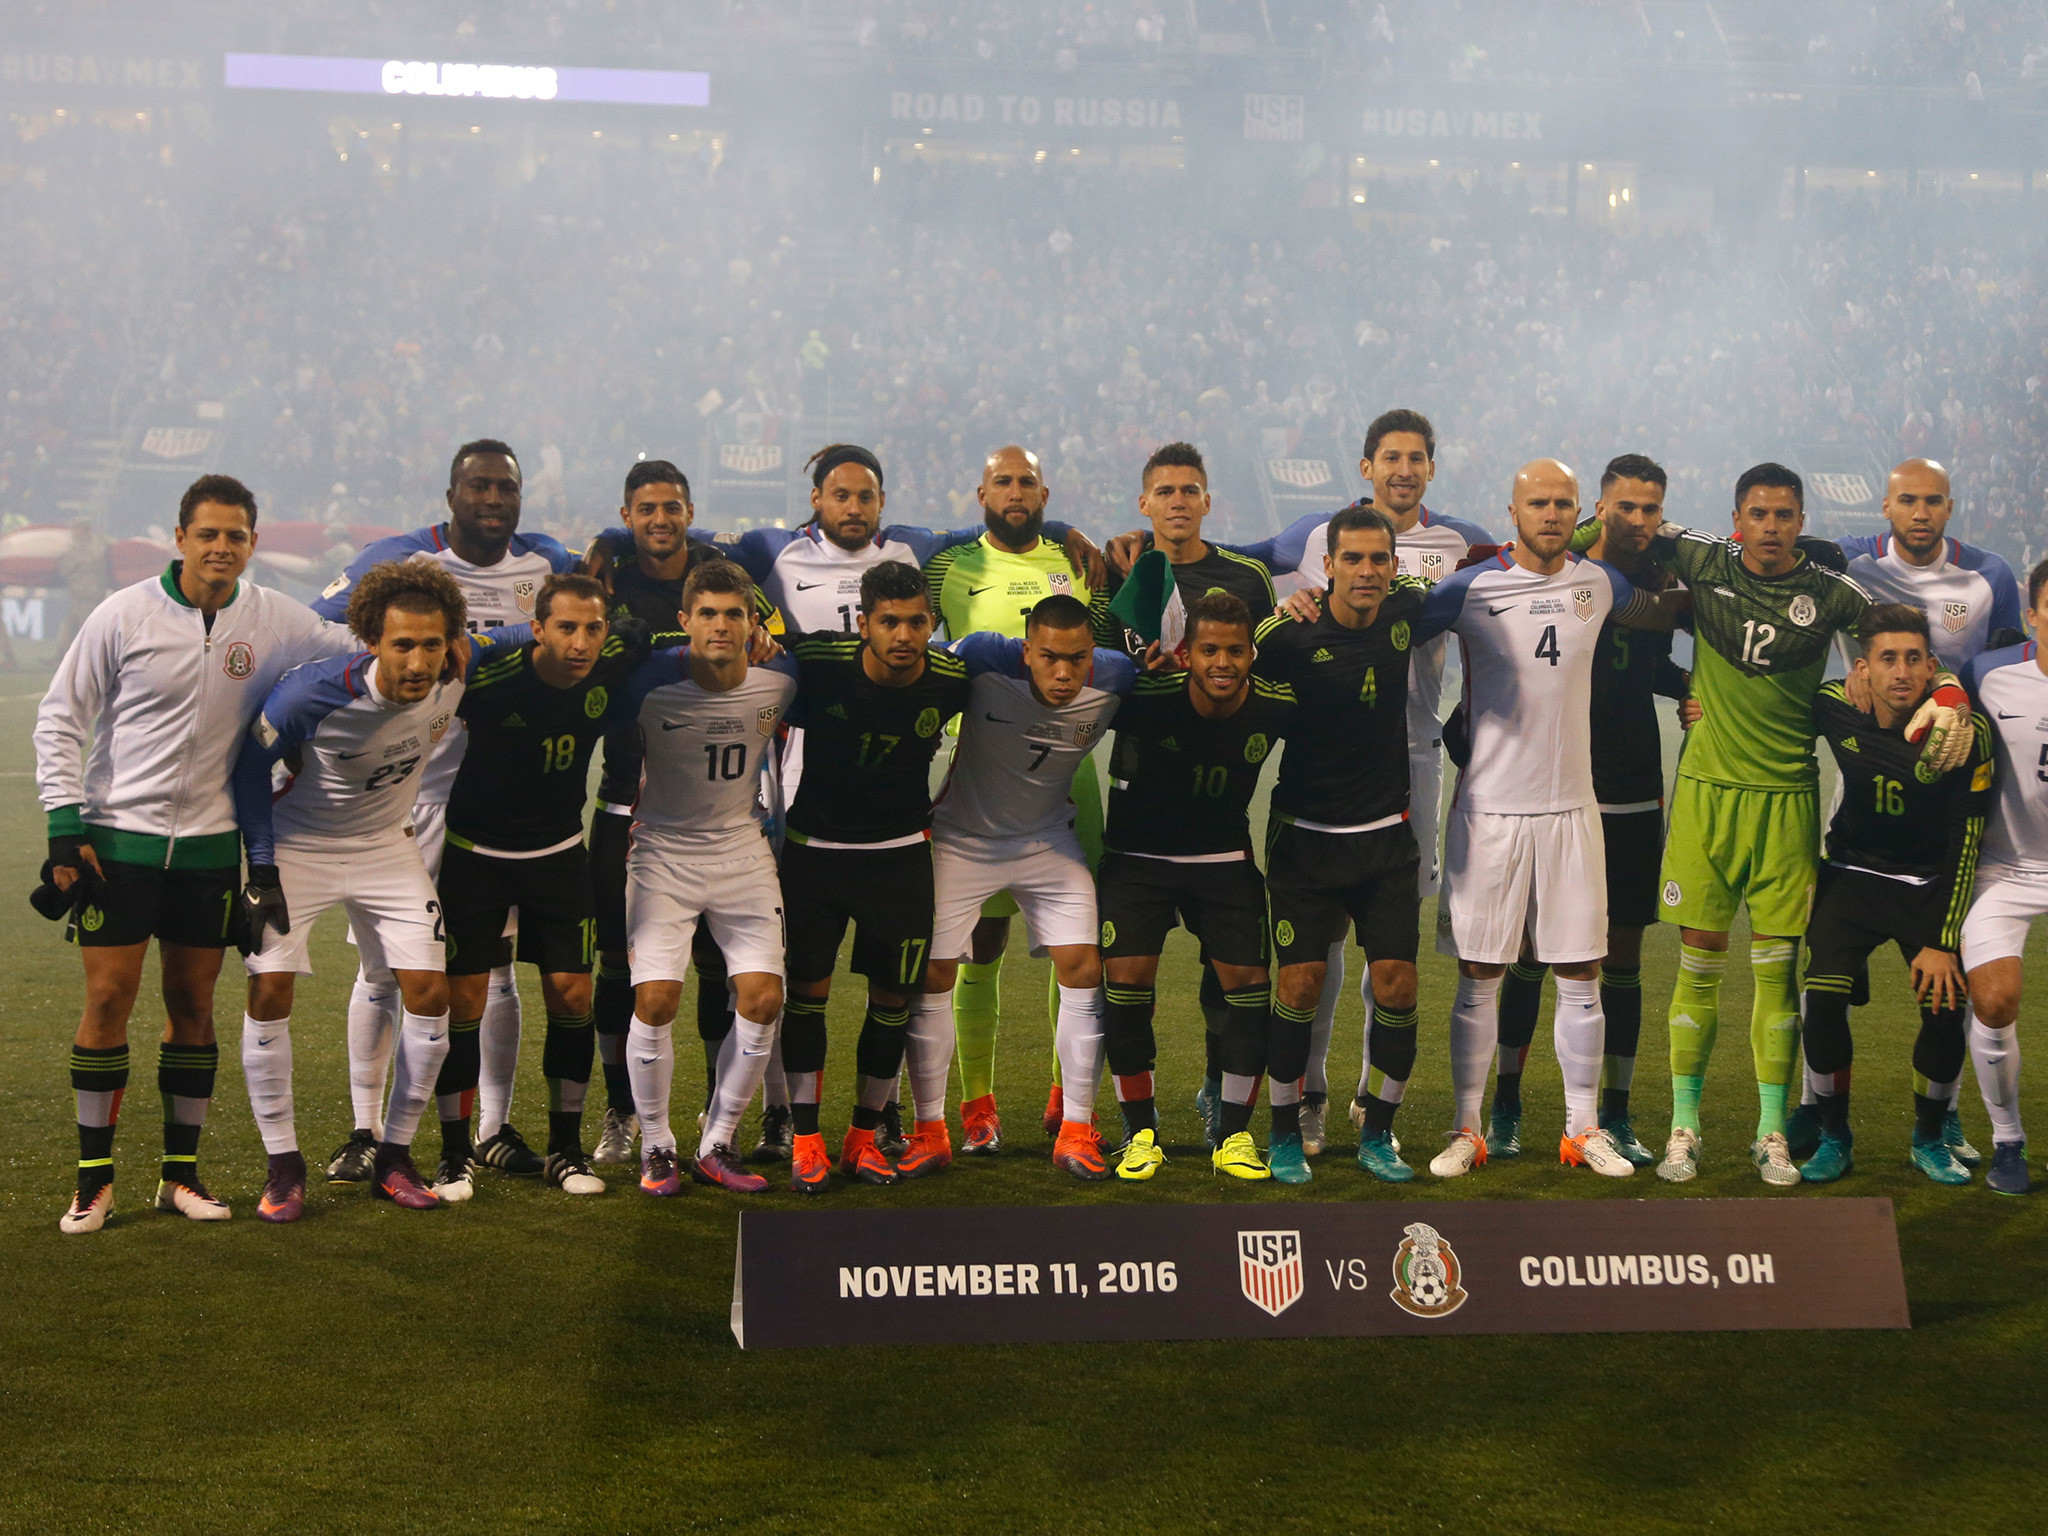 2048x1536 United States and Mexico form 'unity wall' before match after Donald  Trump's presidential victory | The Independent